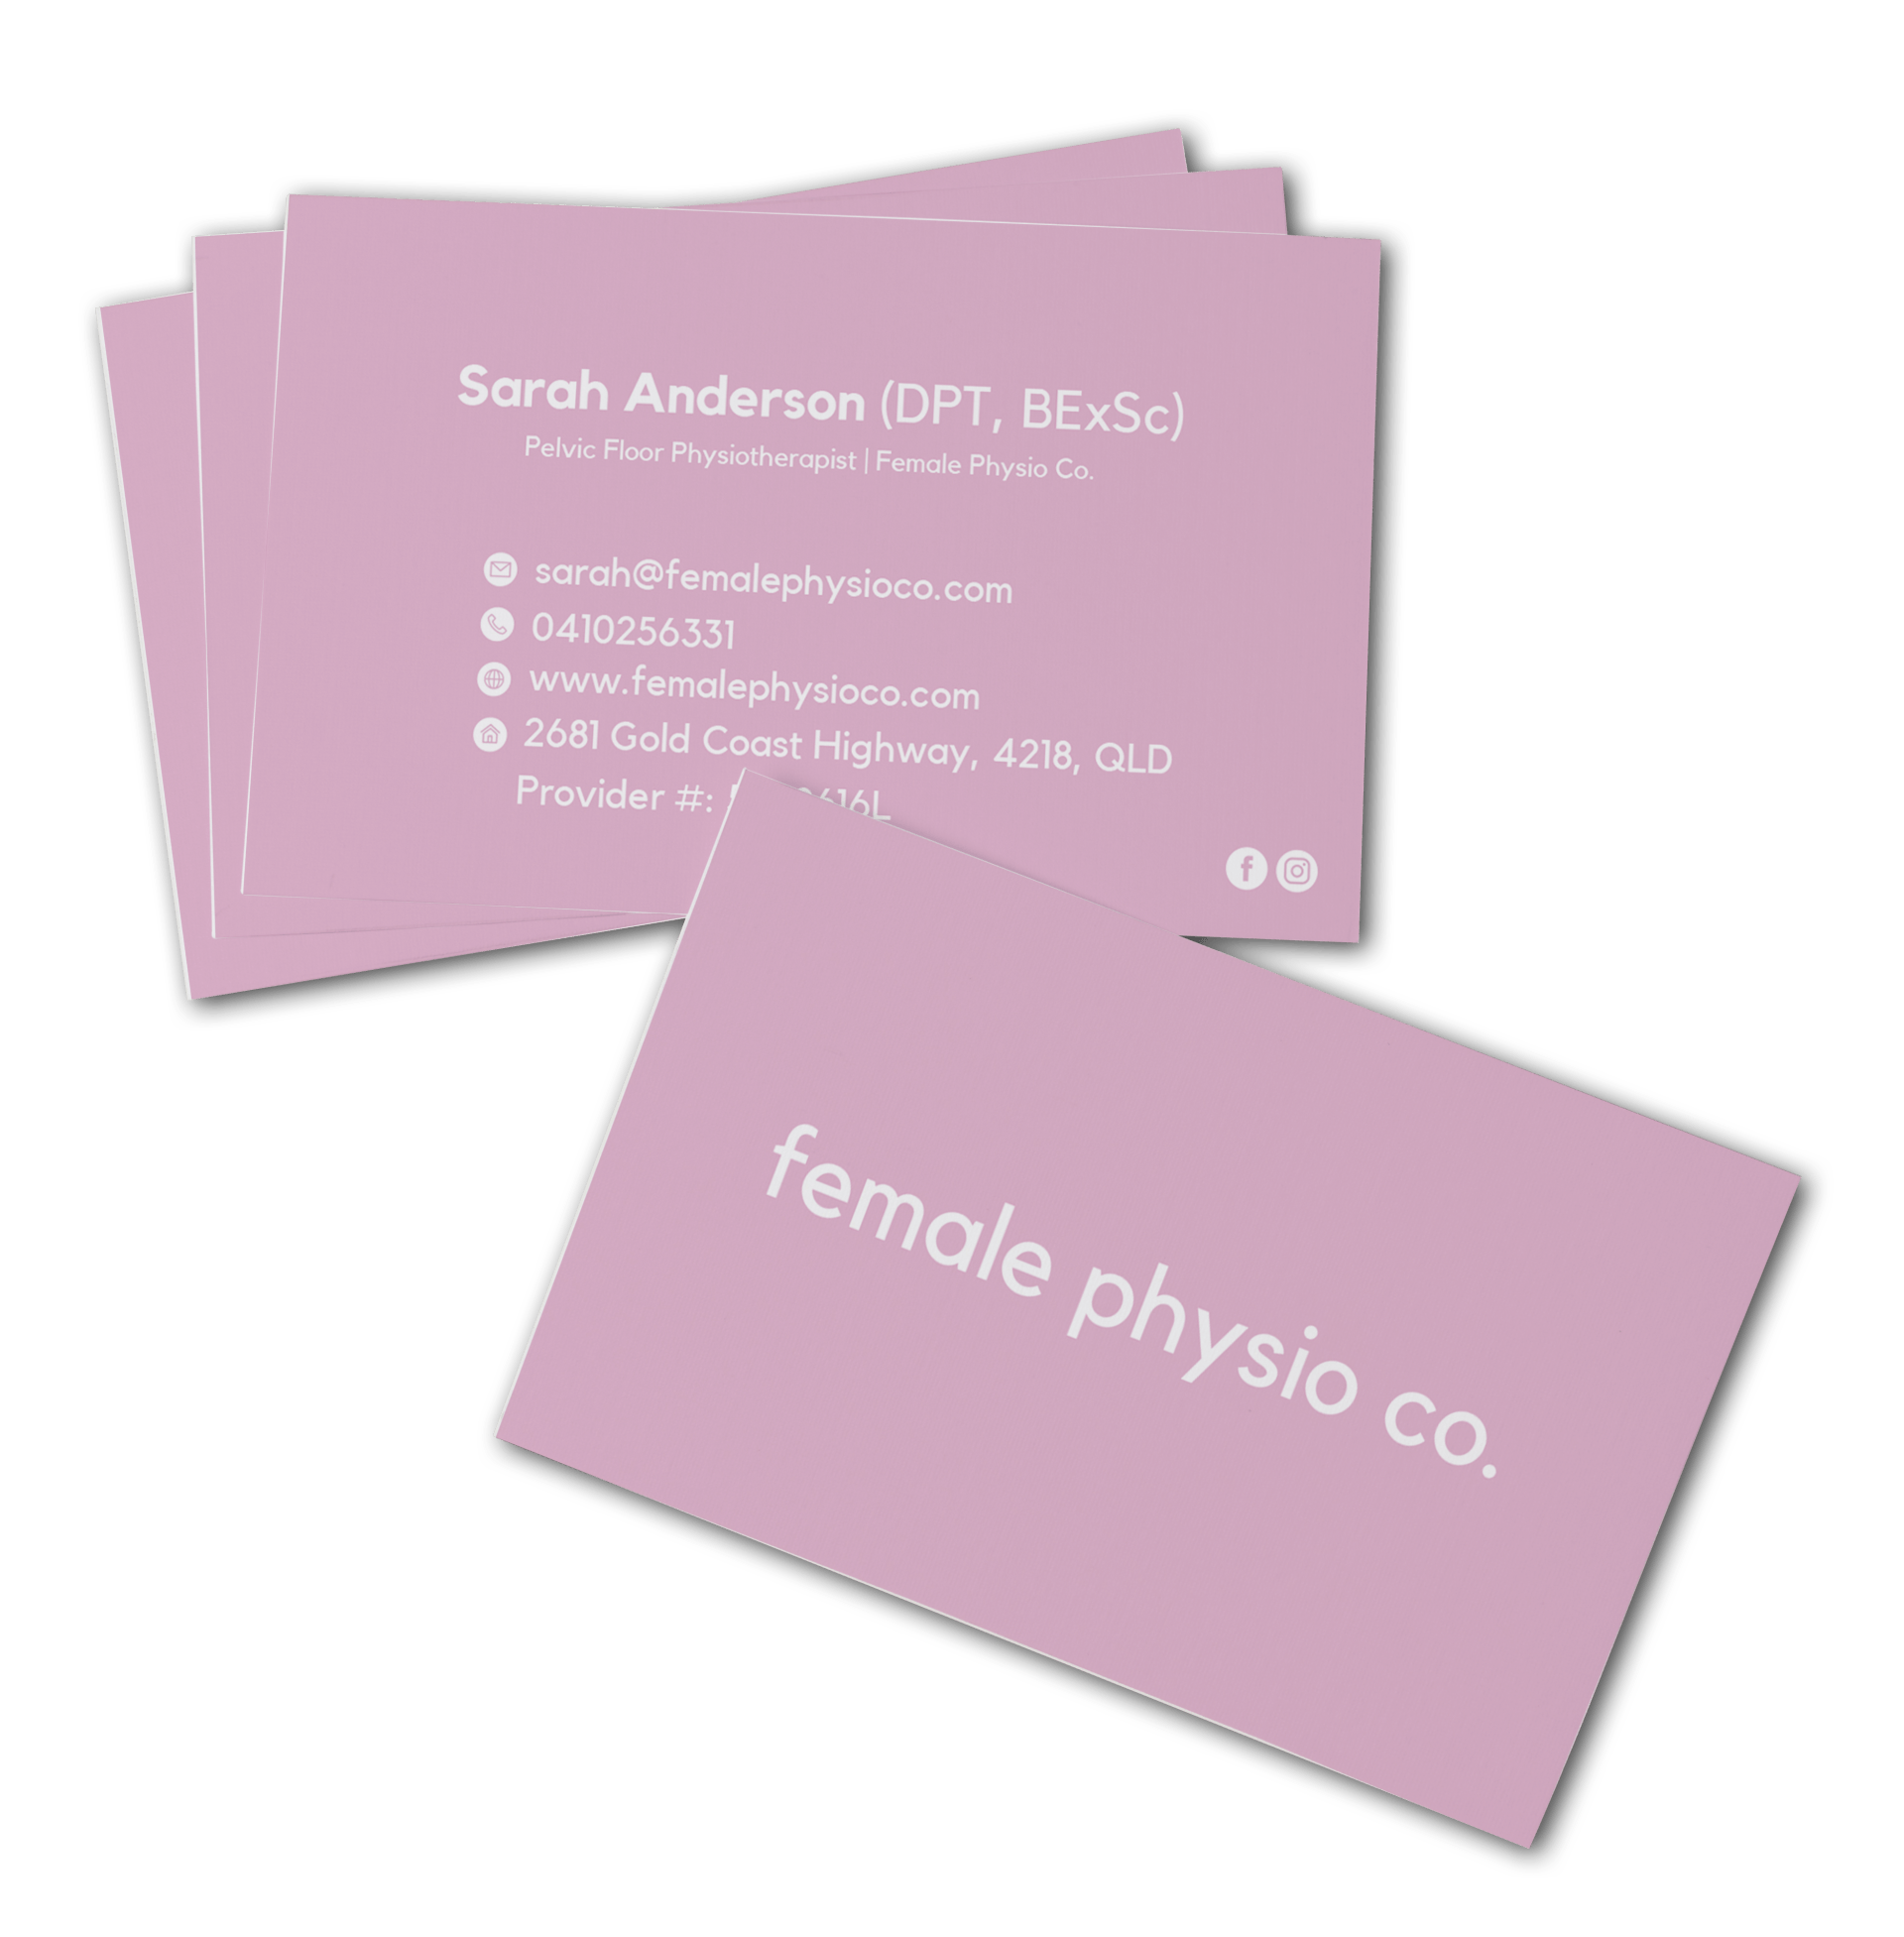 Female-Physio-co-Business-Cards